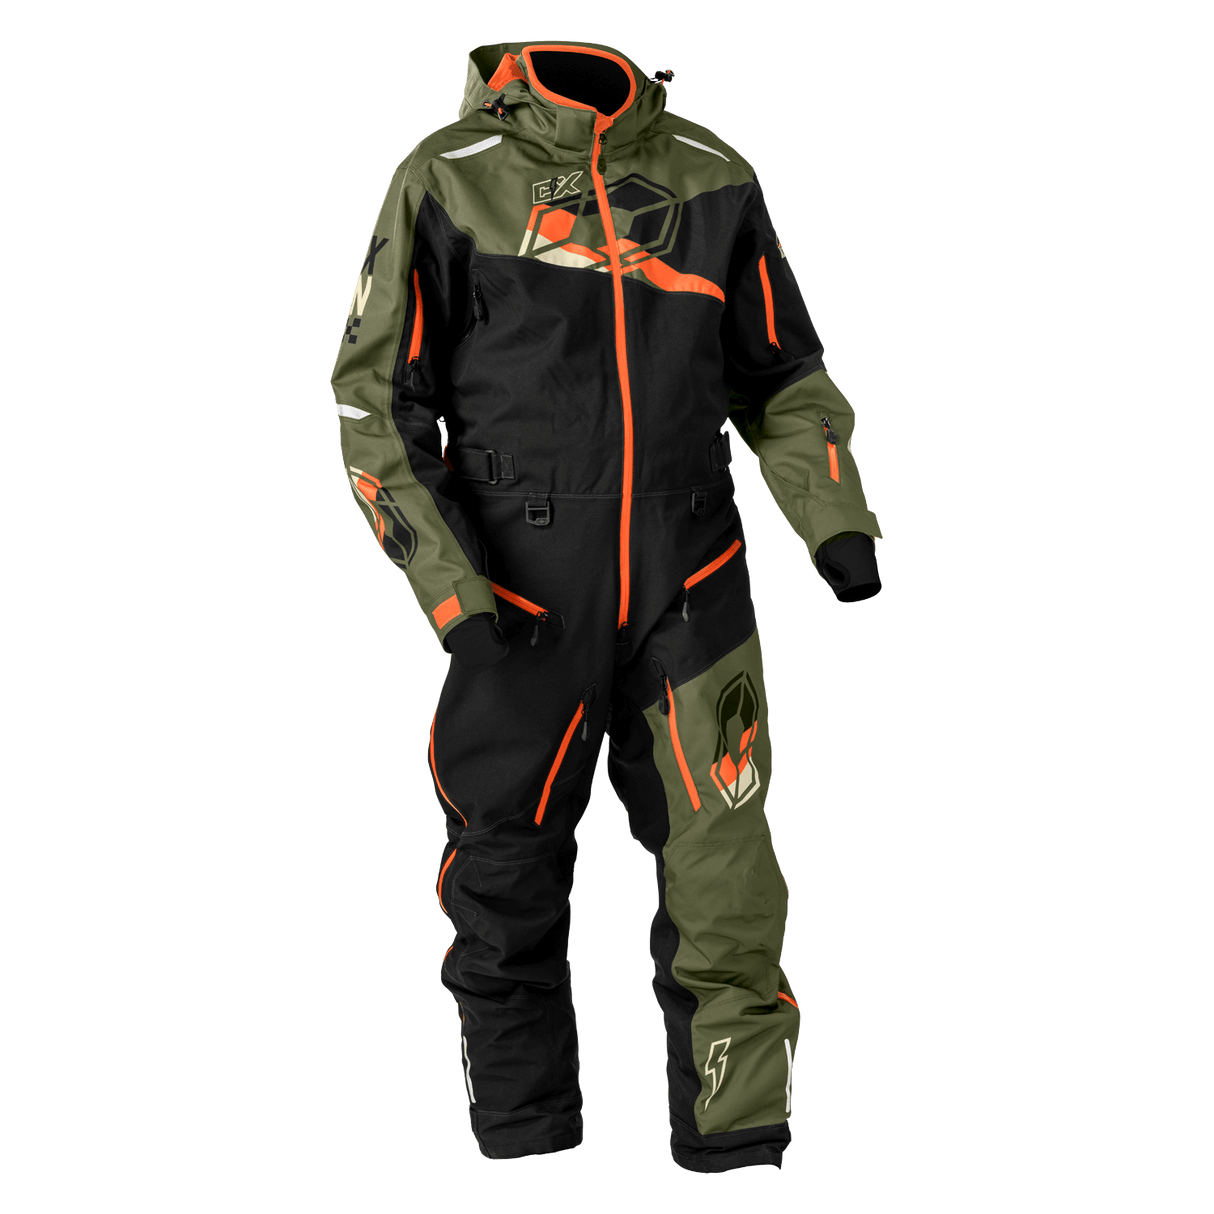 Castle X Freedom Monosuite Shell – SkiDoo Outlet